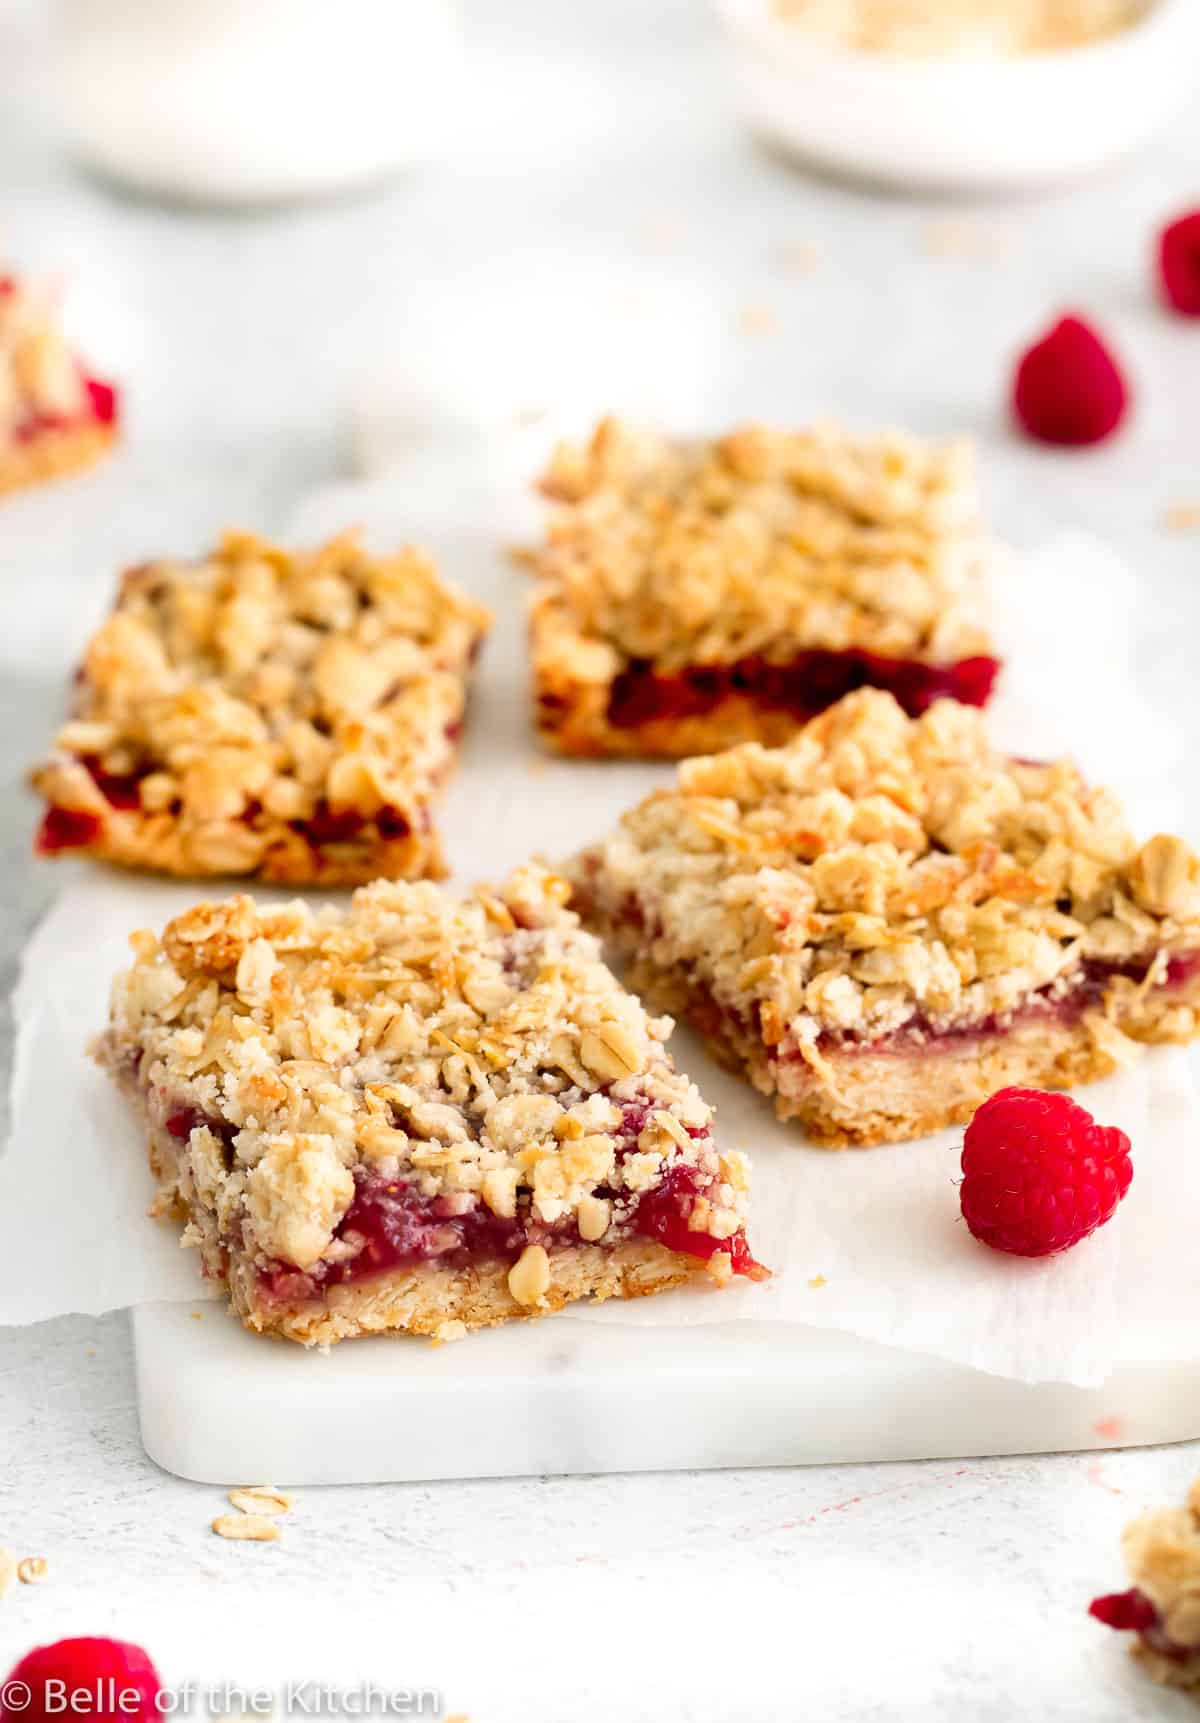 4 raspberry crumble bars on parchment paper.